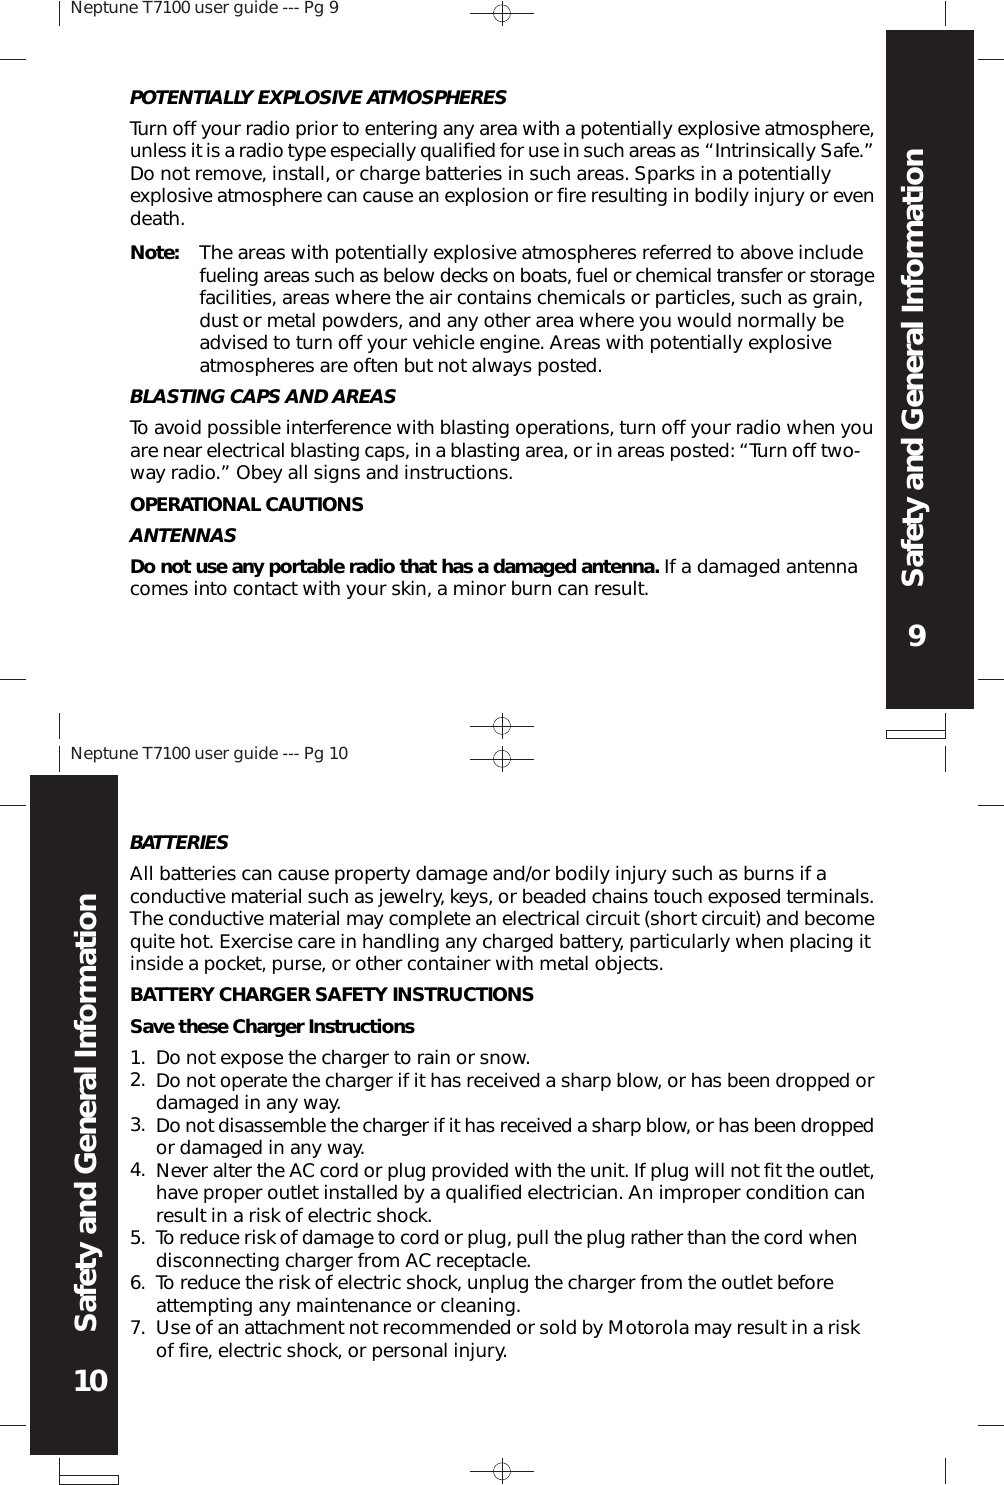 Neptune T7100 user guide --- Pg 99Safety and General InformationNeptune T7100 user guide --- Pg 1010Safety and General InformationPOTENTIALLY EXPLOSIVE ATMOSPHERESTurn off your radio prior to entering any area with a potentially explosive atmosphere,unless it is a radio type especially qualified for use in such areas as “Intrinsically Safe.”Do not remove, install, or charge batteries in such areas. Sparks in a potentiallyexplosive atmosphere can cause an explosion or fire resulting in bodily injury or evendeath.Note: The areas with potentially explosive atmospheres referred to above includefueling areas such as below decks on boats, fuel or chemical transfer or storagefacilities, areas where the air contains chemicals or particles, such as grain,dust or metal powders, and any other area where you would normally beadvised to turn off your vehicle engine. Areas with potentially explosiveatmospheres are often but not always posted.BLASTING CAPS AND AREASTo avoid possible interference with blasting operations, turn off your radio when youare near electrical blasting caps, in a blasting area, or in areas posted: “Turn off two-way radio.” Obey all signs and instructions.OPERATIONAL CAUTIONSANTENNASDo not use any portable radio that has a damaged antenna. If a damaged antennacomes into contact with your skin, a minor burn can result.BATTERIESAll batteries can cause property damage and/or bodily injury such as burns if aconductive material such as jewelry, keys, or beaded chains touch exposed terminals.The conductive material may complete an electrical circuit (short circuit) and becomequite hot. Exercise care in handling any charged battery, particularly when placing itinside a pocket, purse, or other container with metal objects.BATTERY CHARGER SAFETY INSTRUCTIONSSave these Charger InstructionsDo not expose the charger to rain or snow.Do not operate the charger if it has received a sharp blow, or has been dropped ordamaged in any way.Do not disassemble the charger if it has received a sharp blow, or has been droppedor damaged in any way.Never alter the AC cord or plug provided with the unit. If plug will not fit the outlet,have proper outlet installed by a qualified electrician. An improper condition canresult in a risk of electric shock.To reduce risk of damage to cord or plug, pull the plug rather than the cord whendisconnecting charger from AC receptacle.To reduce the risk of electric shock, unplug the charger from the outlet beforeattempting any maintenance or cleaning.Use of an attachment not recommended or sold by Motorola may result in a riskof fire, electric shock, or personal injury.1.2.3.4.5.6.7.